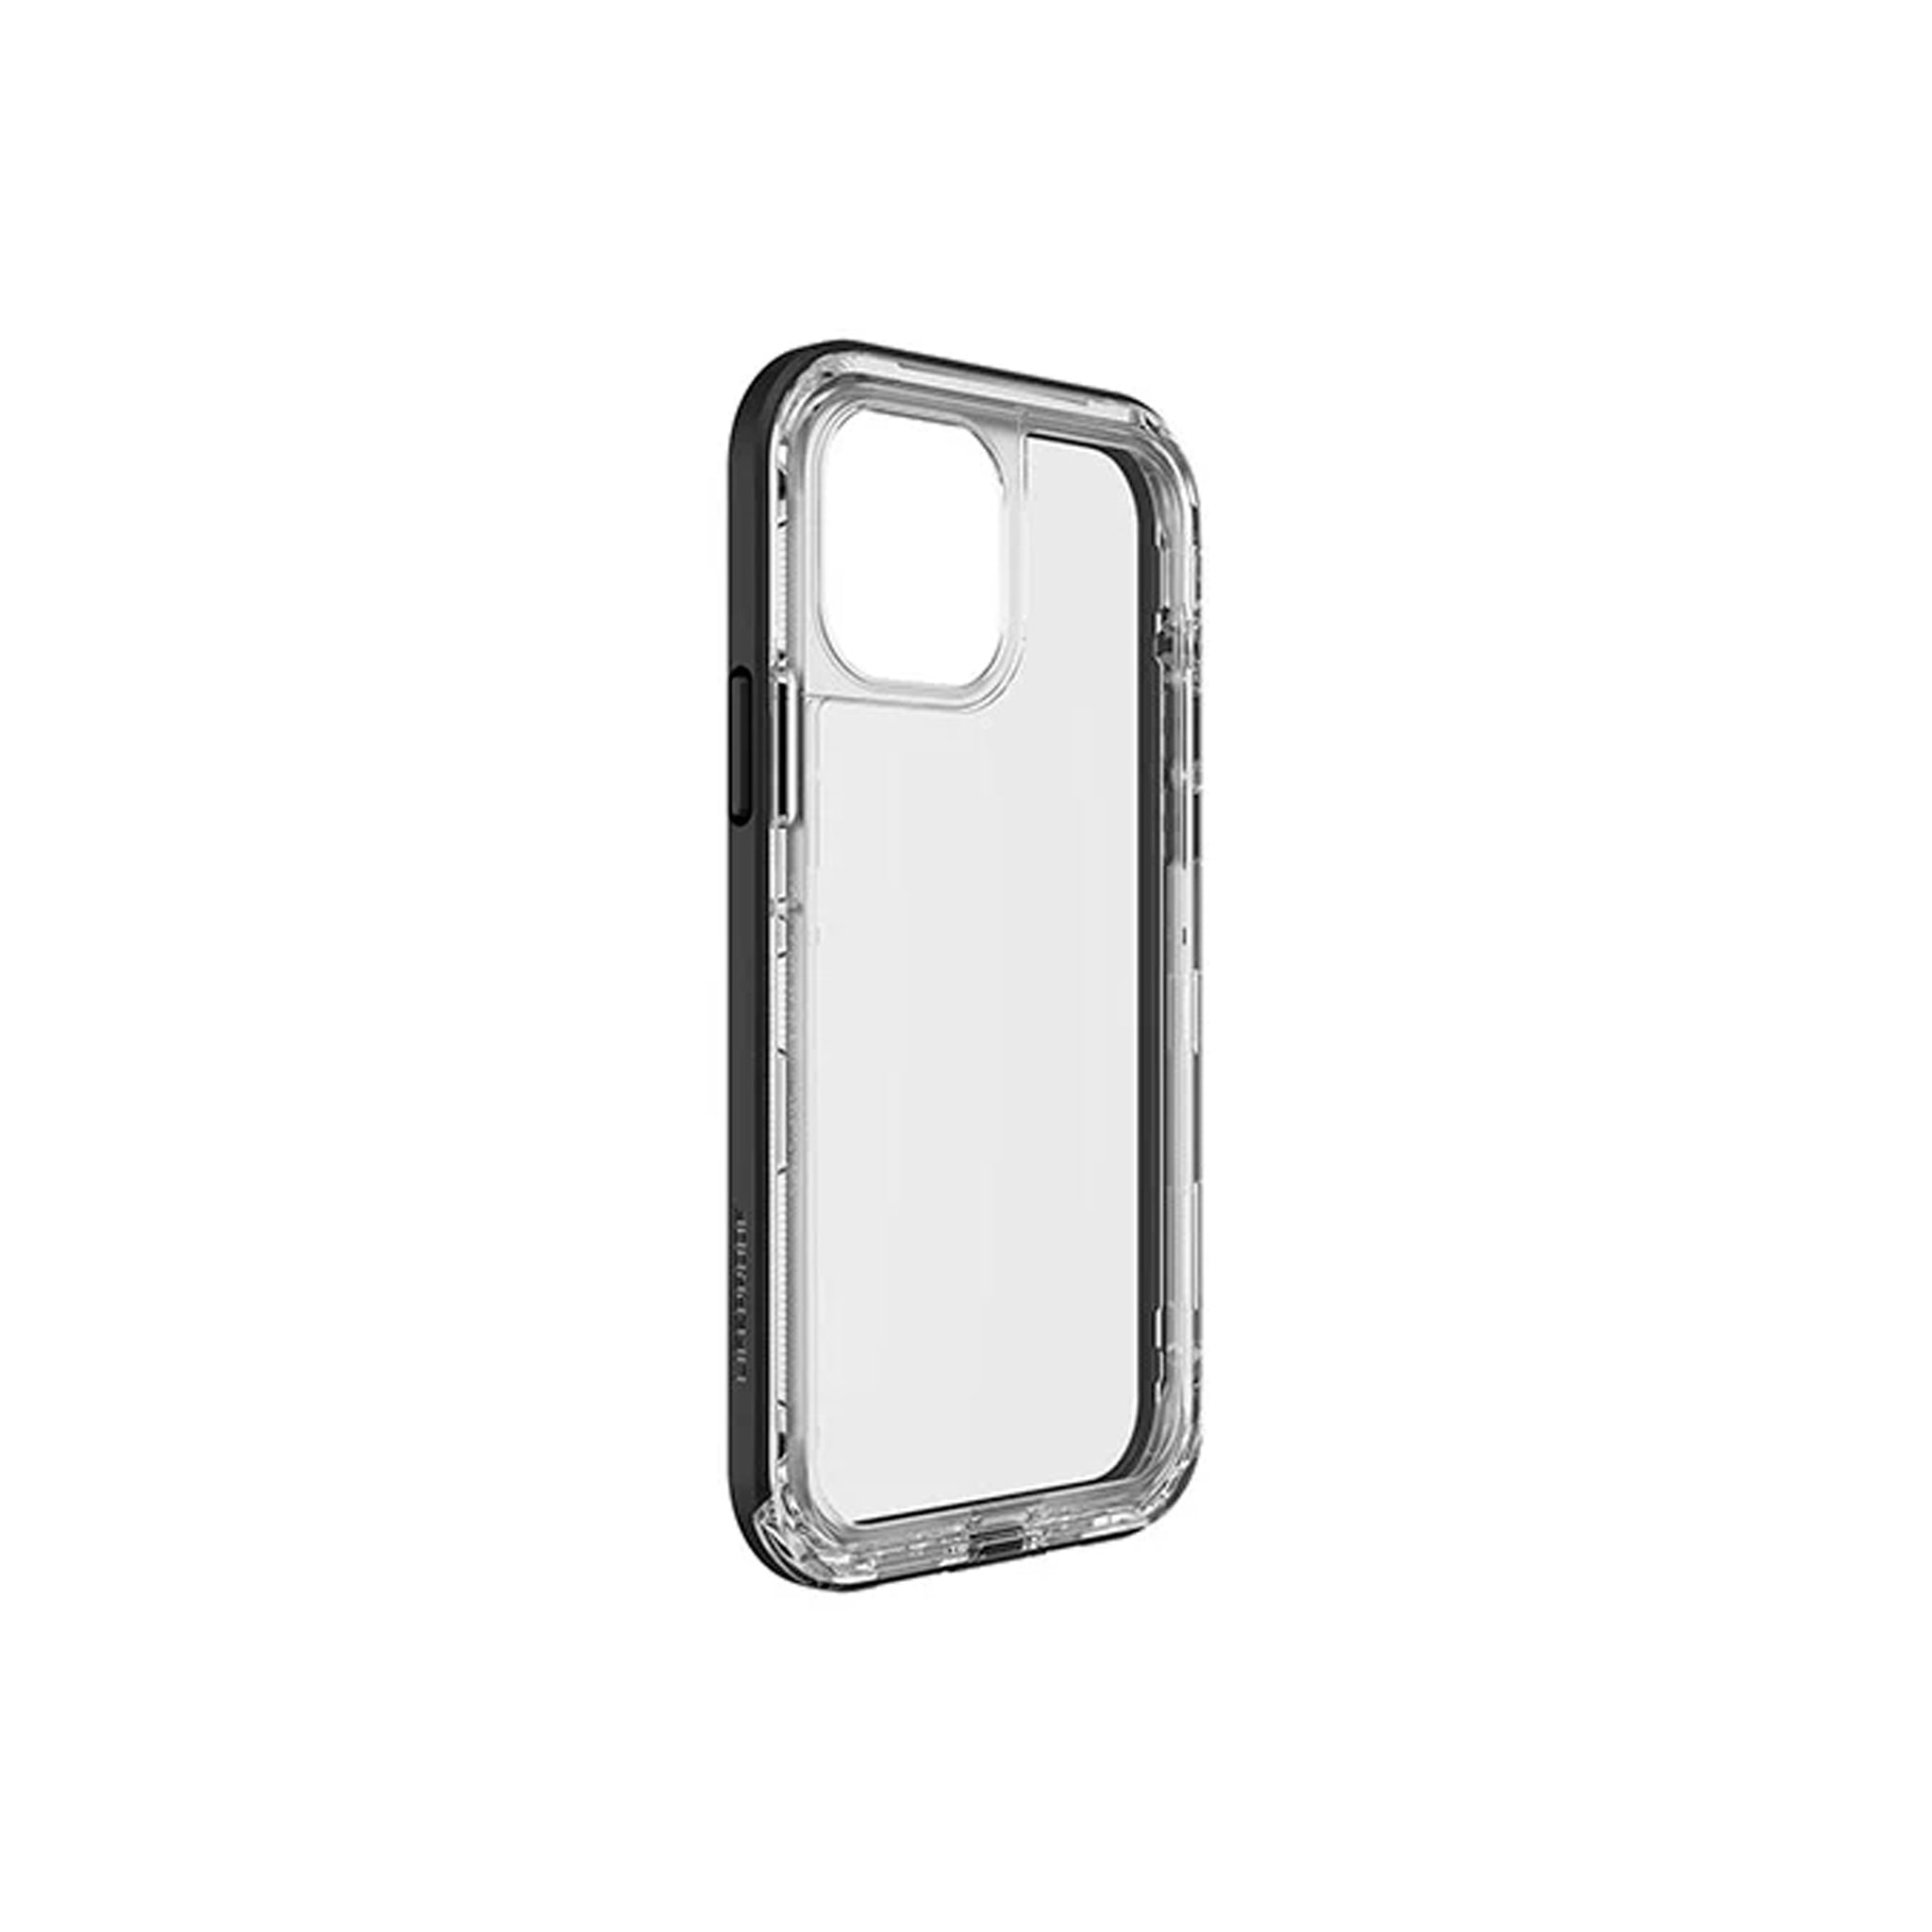 LifeProof - Next for iPhone 12 / 12 Pro - Black Crysral